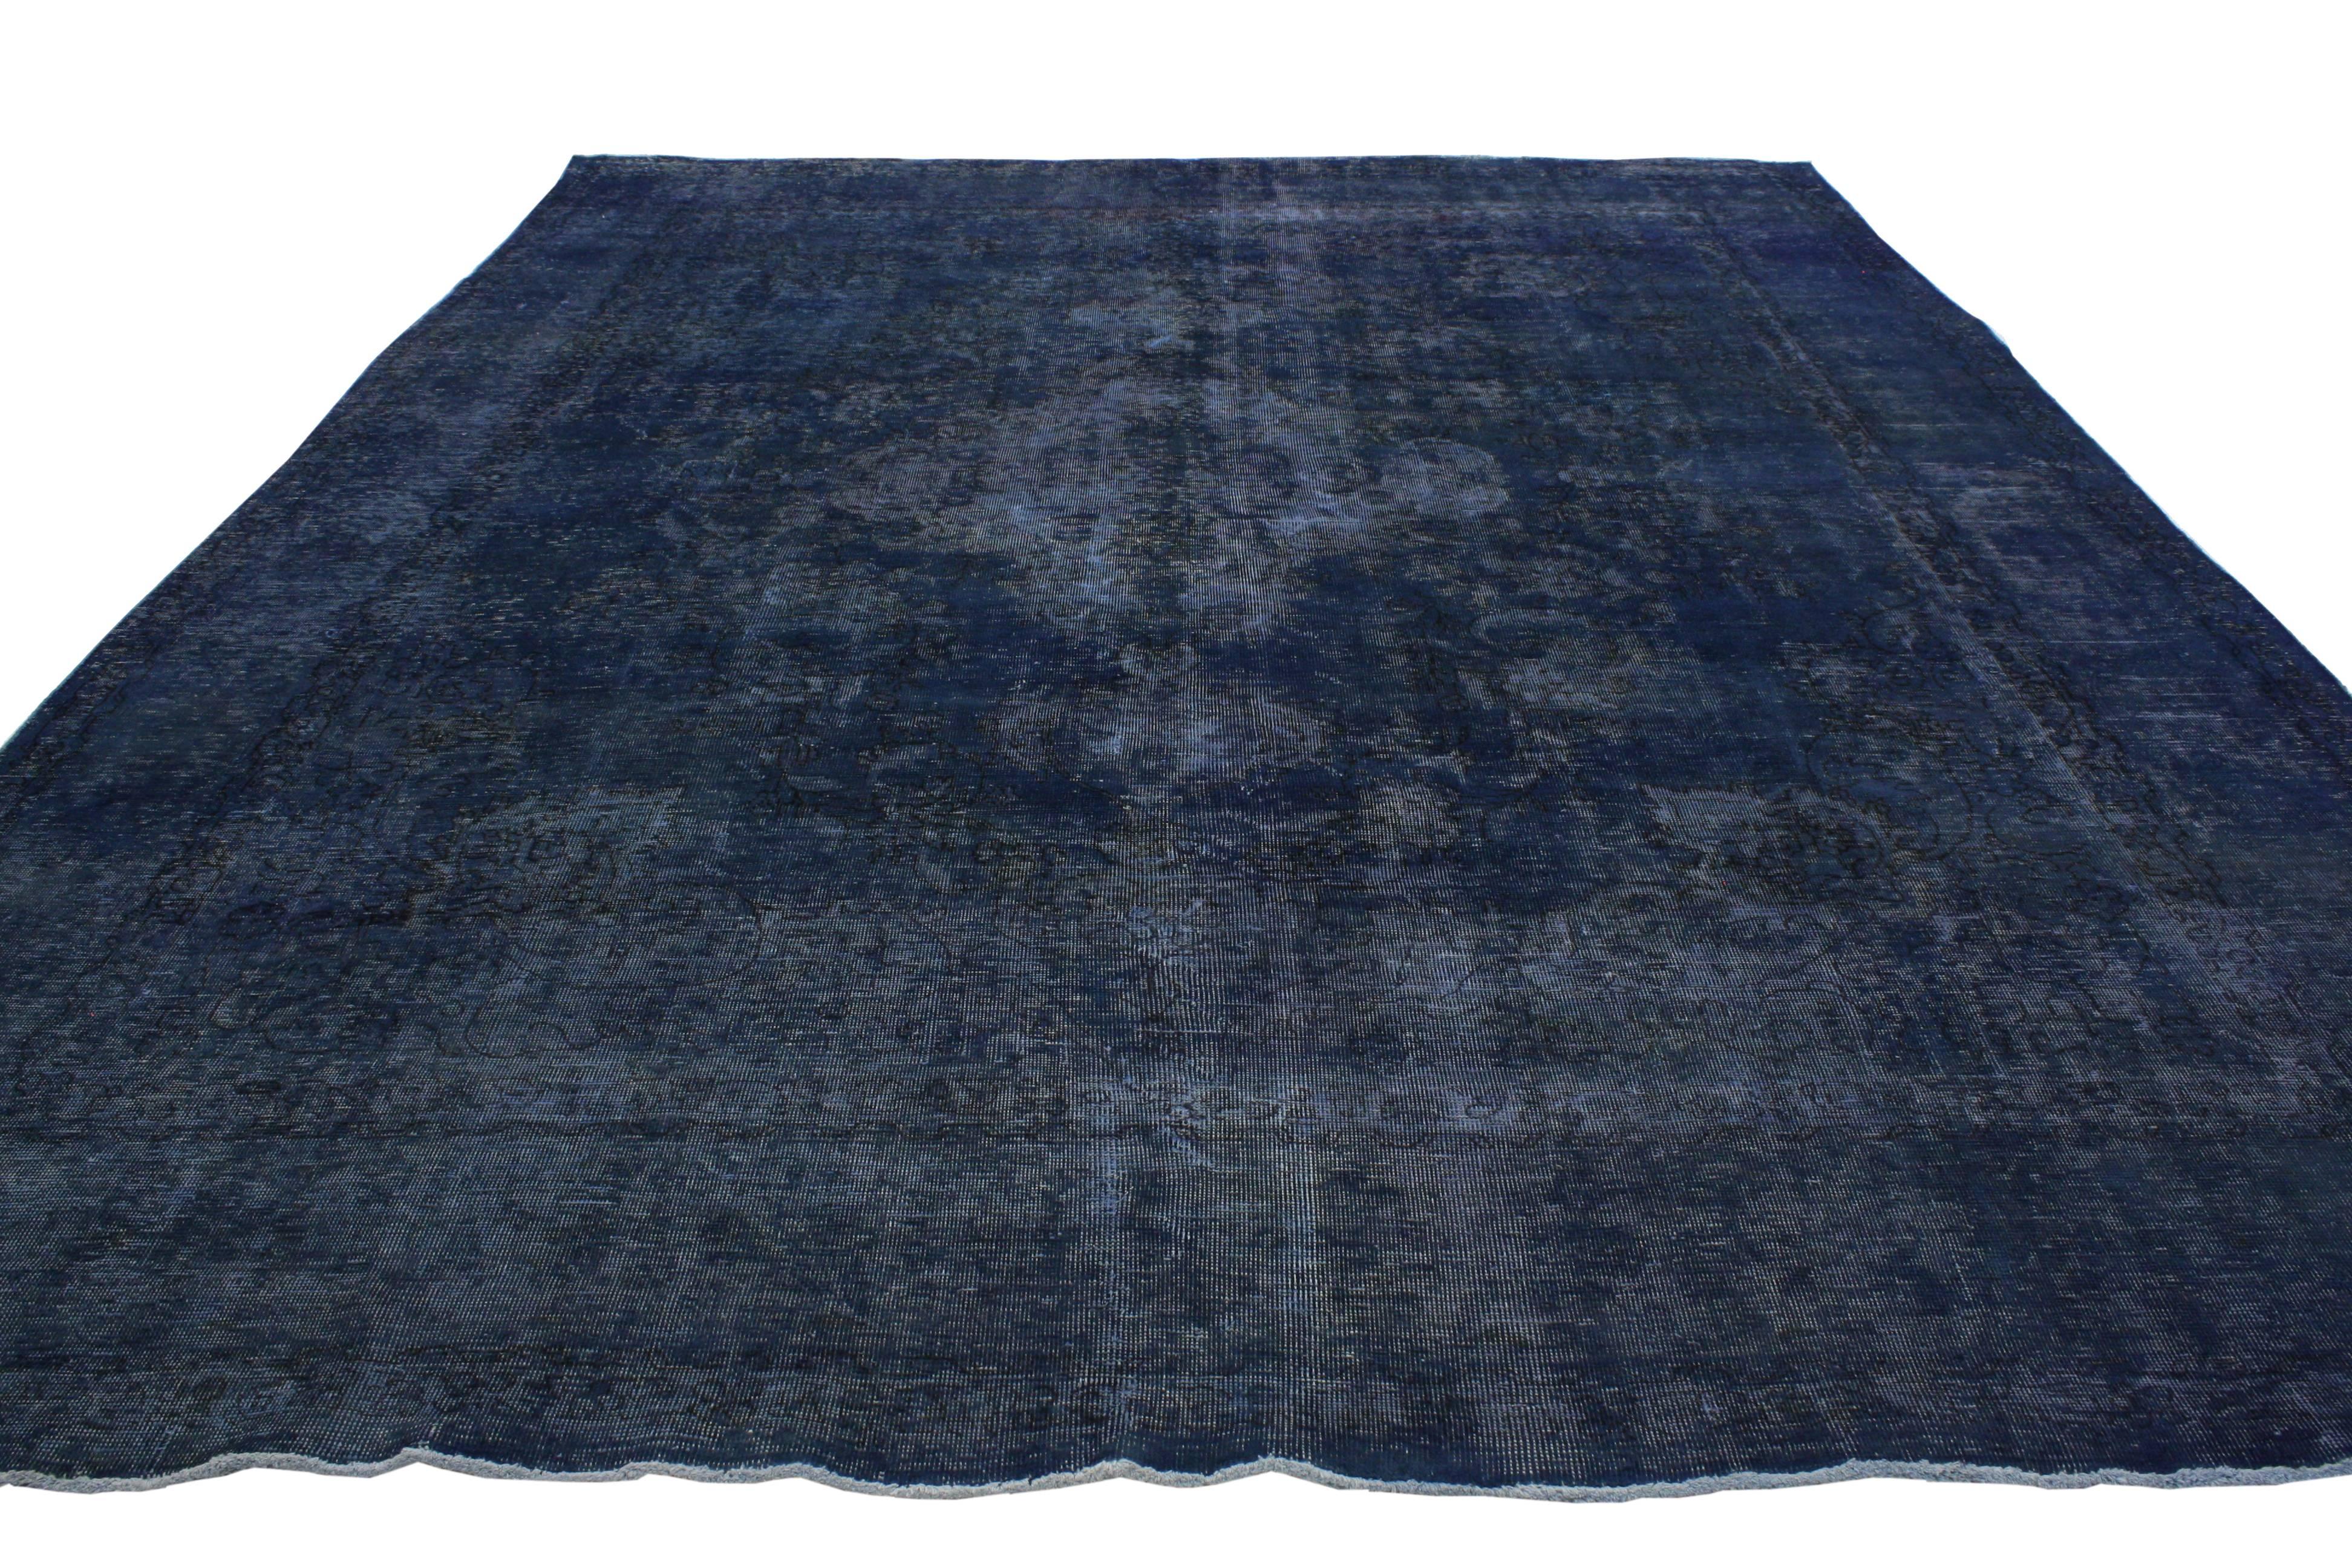 Hand-Knotted Vintage Persian Tabriz Rug Overdyed in Blue with Modern Industrial Style